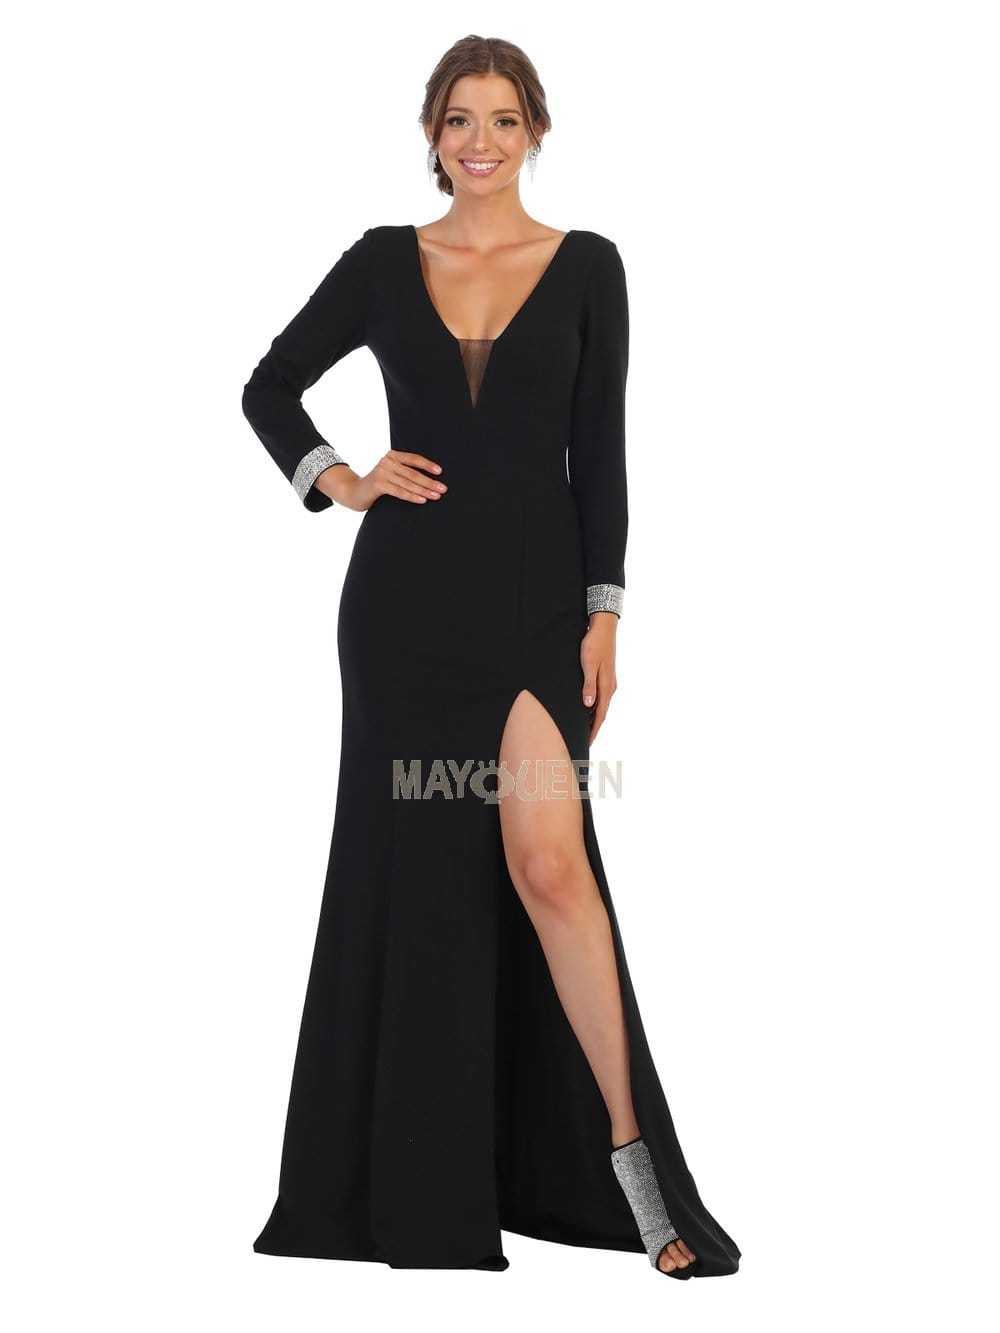 May Queen, May Queen - MQ1761 Plunging V-Neck Long Sleeves Dress with Slit